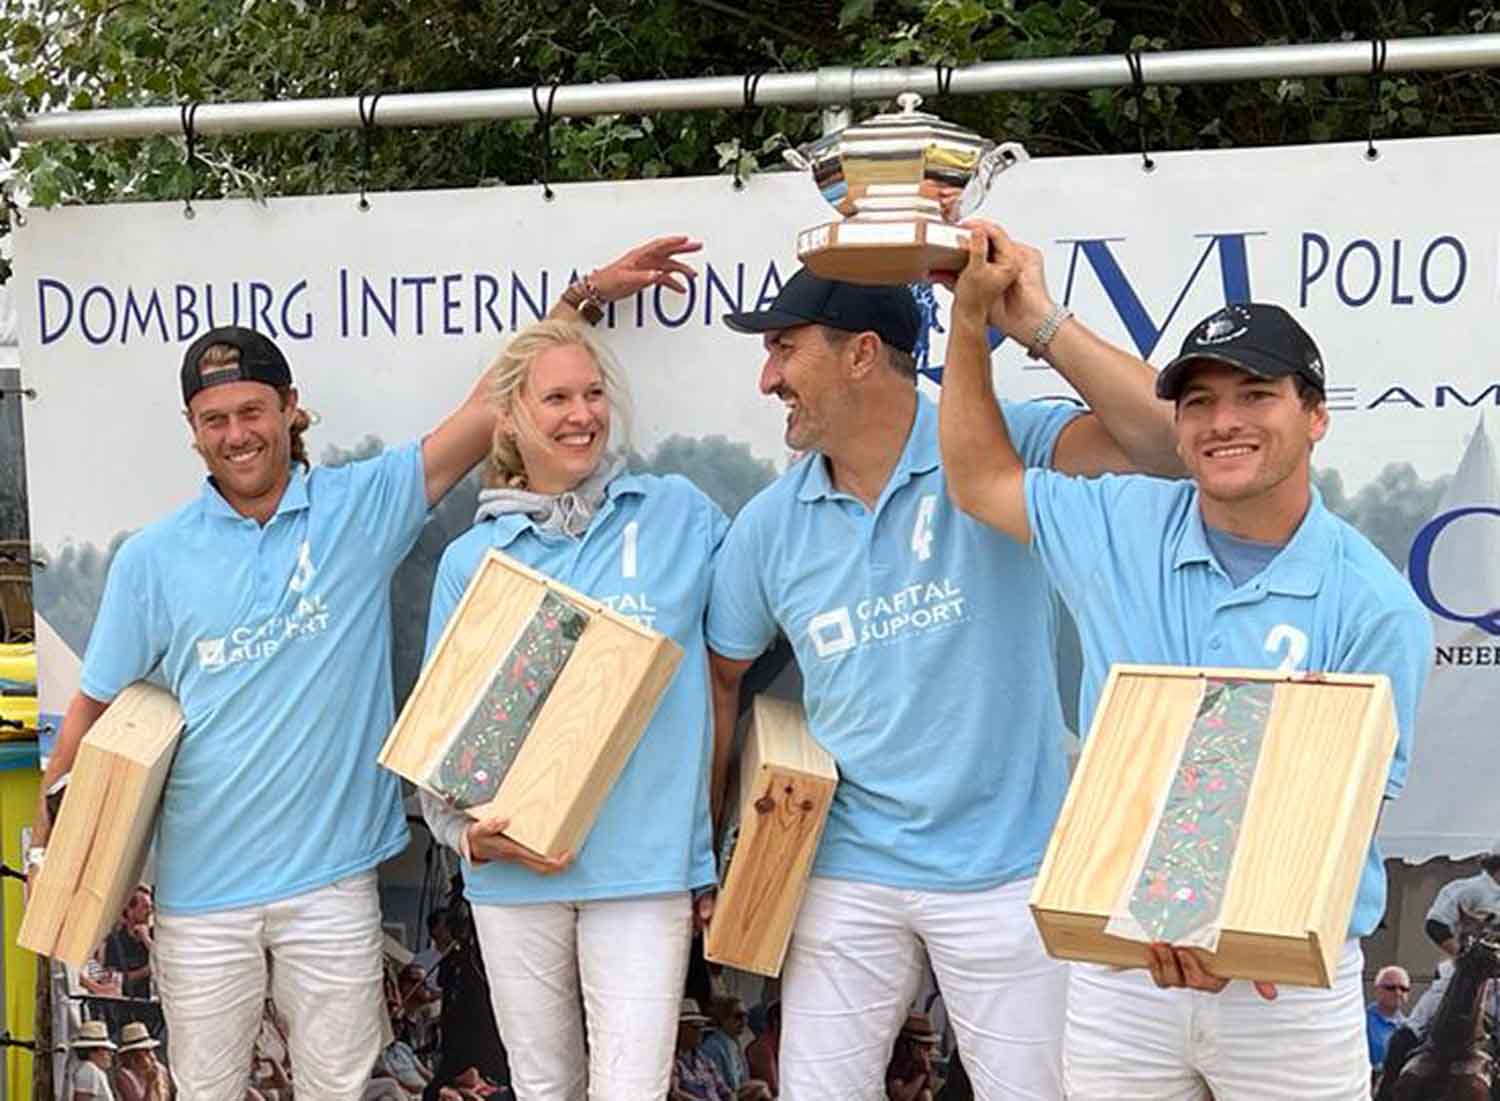 CAPITAL SUPPORT wins the DOMBURG POLO TROPHY 2022 !